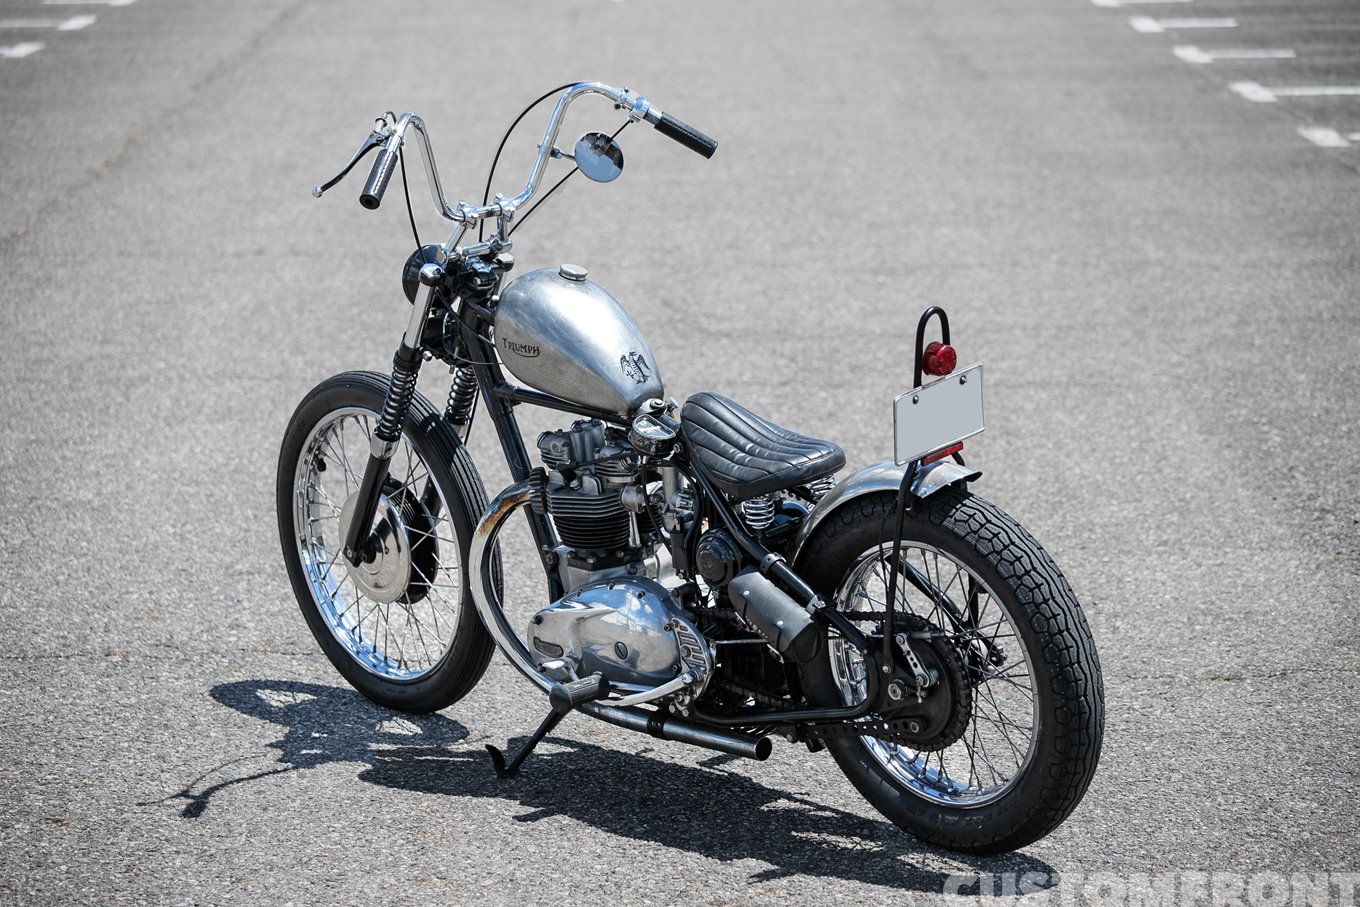 TRADS & SHALLOW MOTORCYCLE SHOPのトライアンフTR6チョッパー 1967年